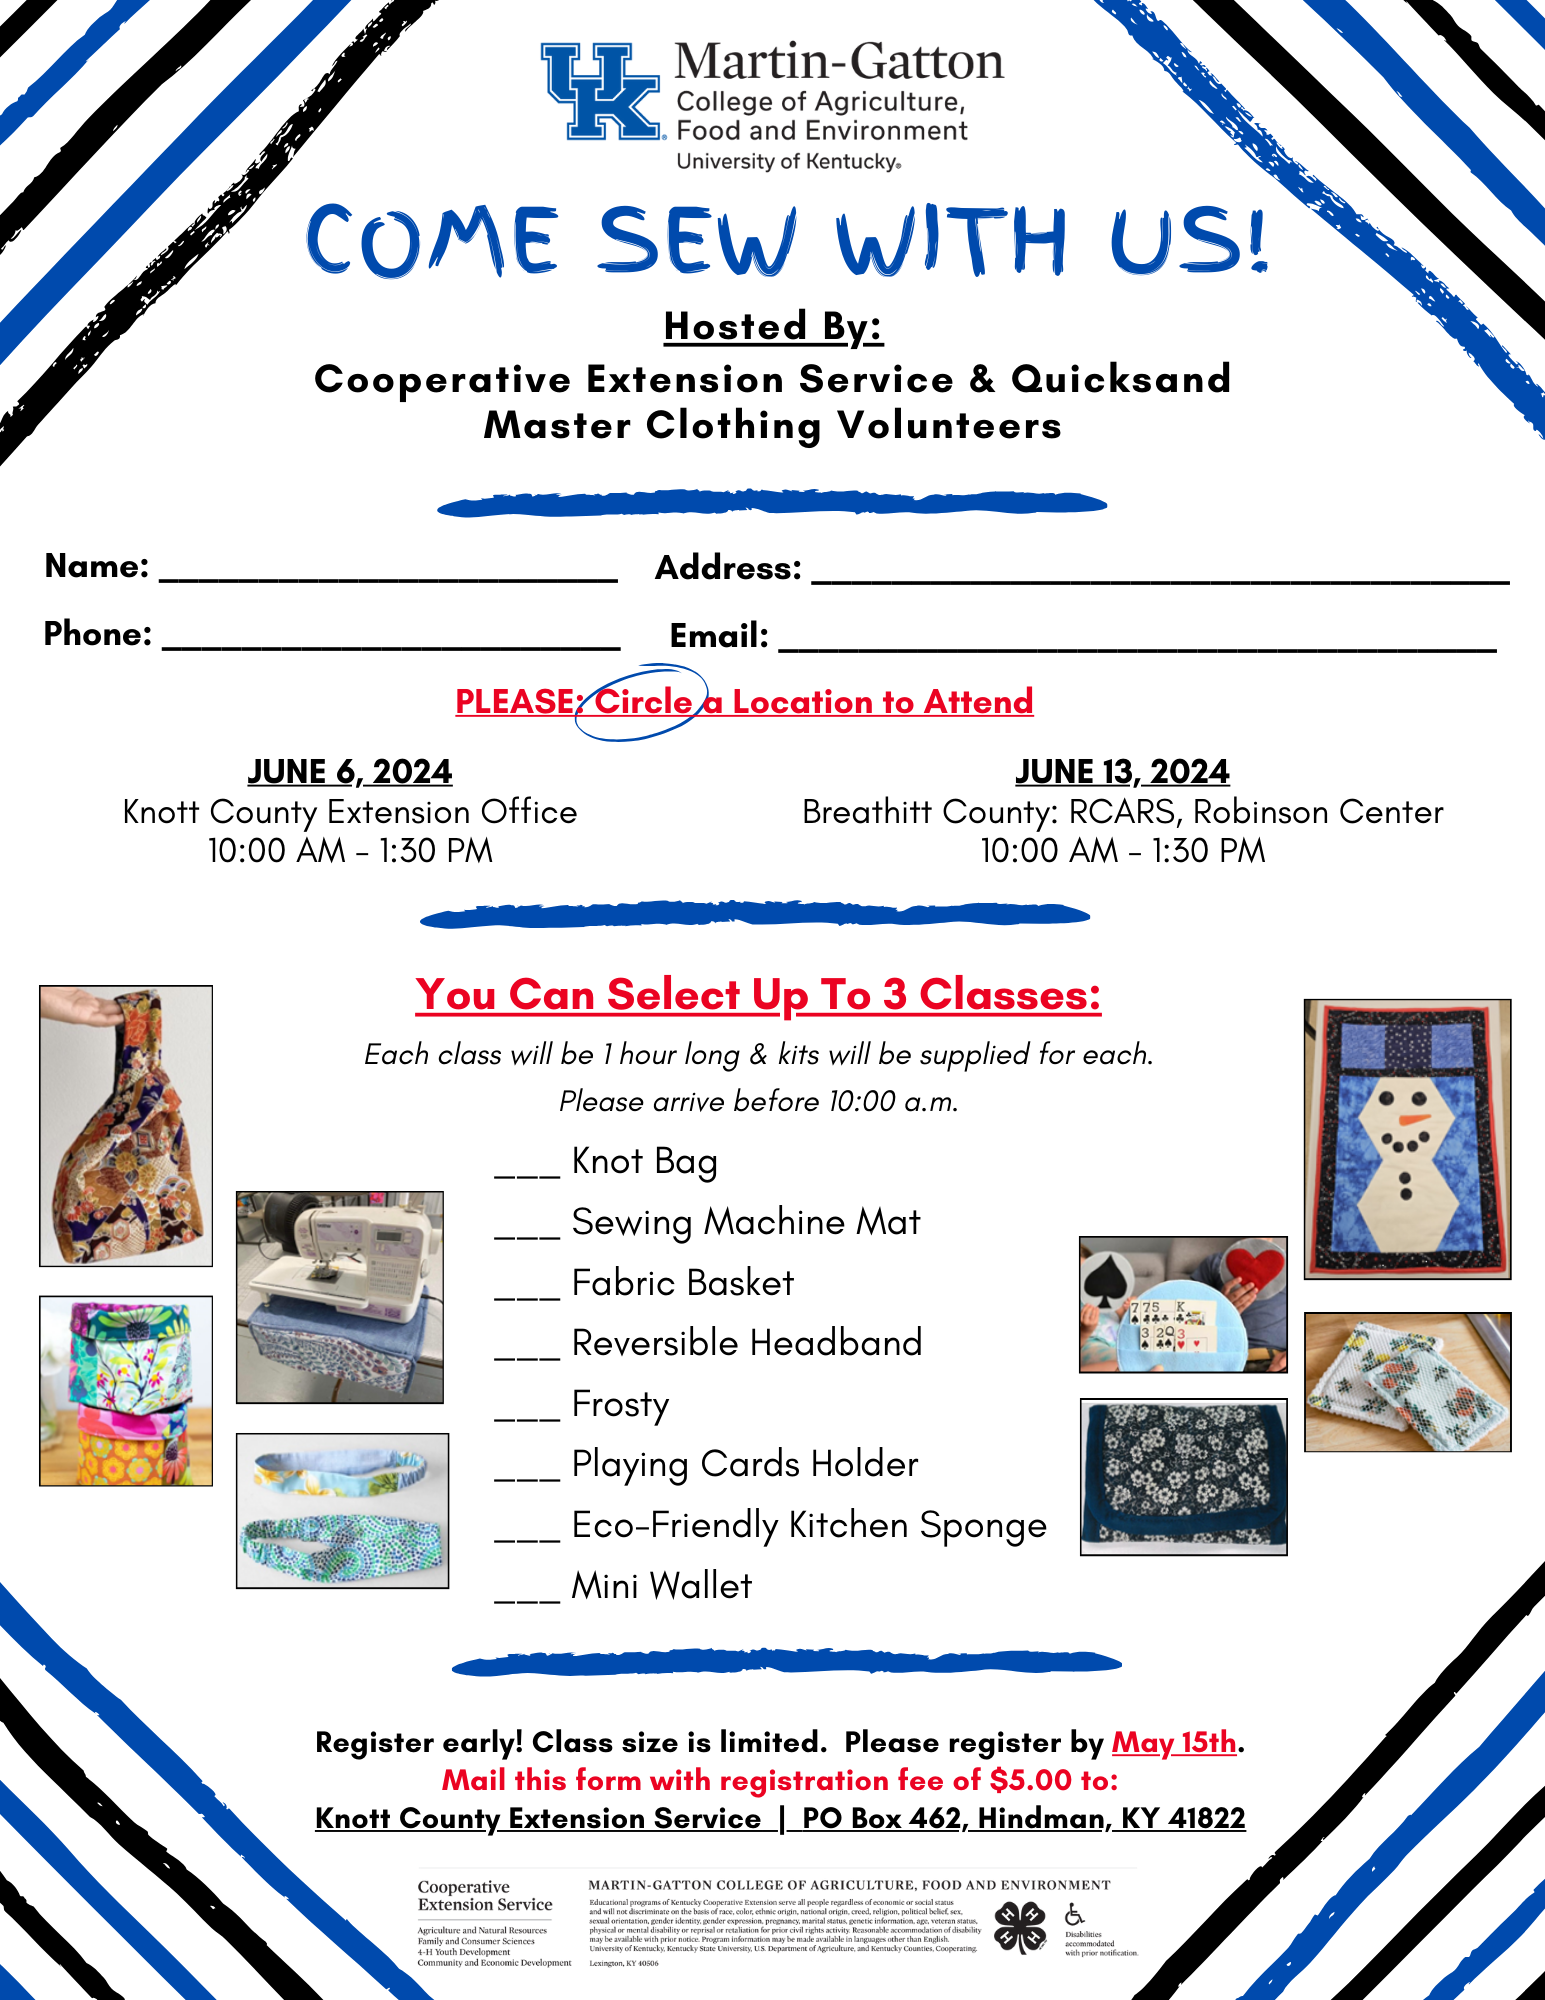 Come Sew With Us! Flyer